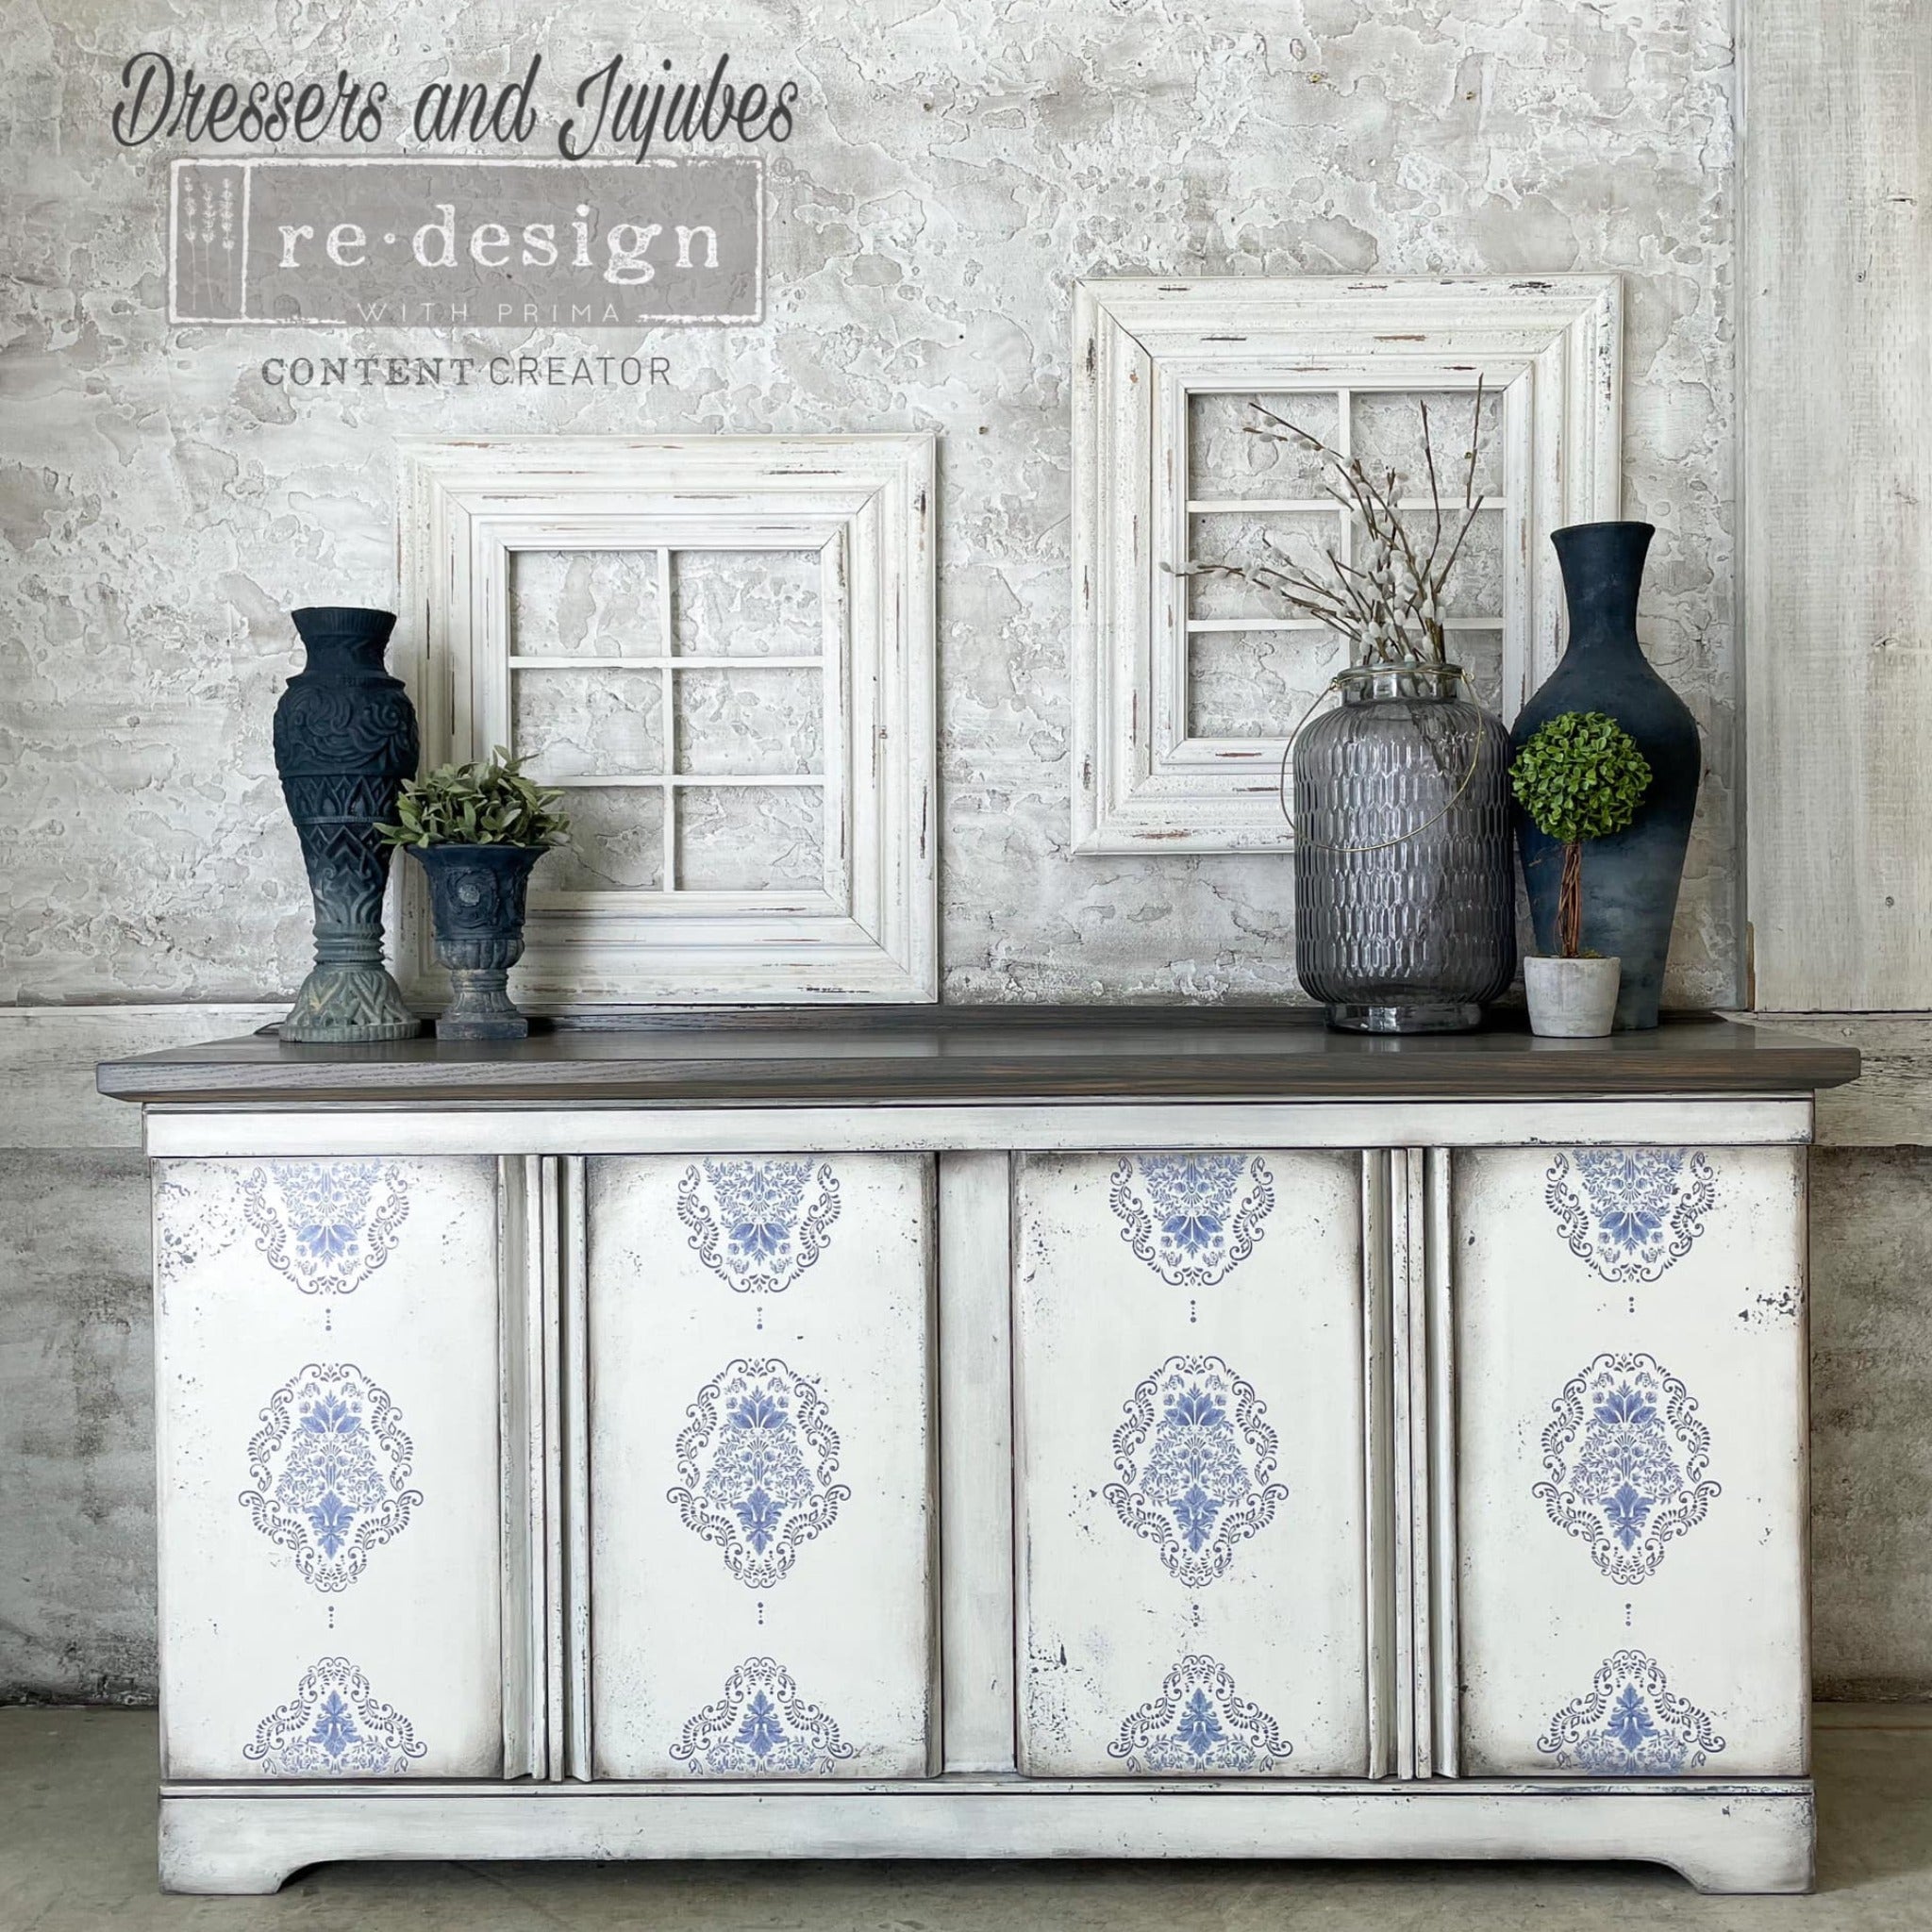 A vintage buffet table refurbished by Dressers and Jujubes is painted white with grey corner smudging and features ReDesign with Prima's Kacha Dana Damask transfer on its 4 doors.